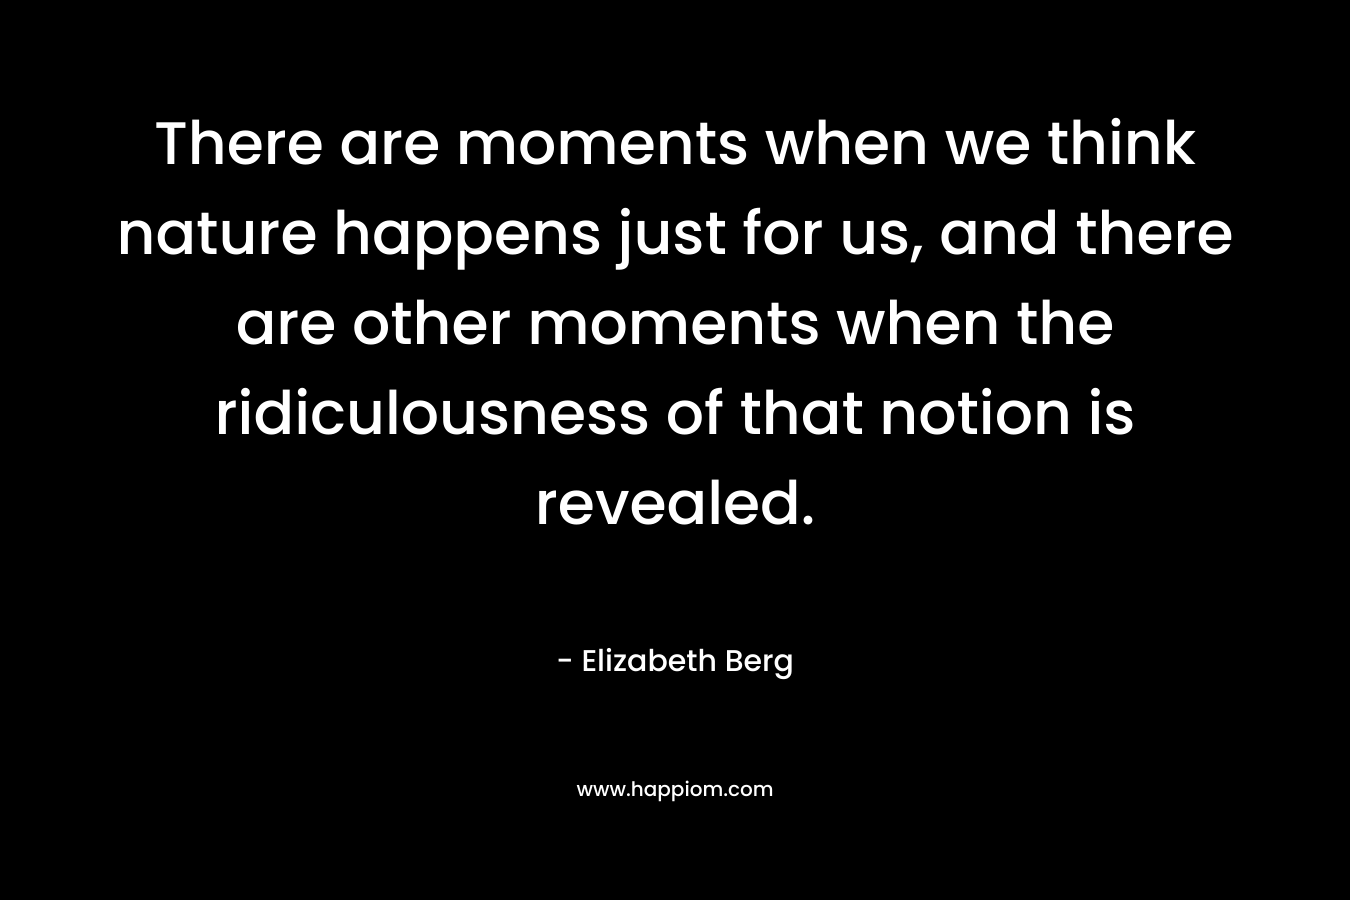 There are moments when we think nature happens just for us, and there are other moments when the ridiculousness of that notion is revealed. – Elizabeth Berg